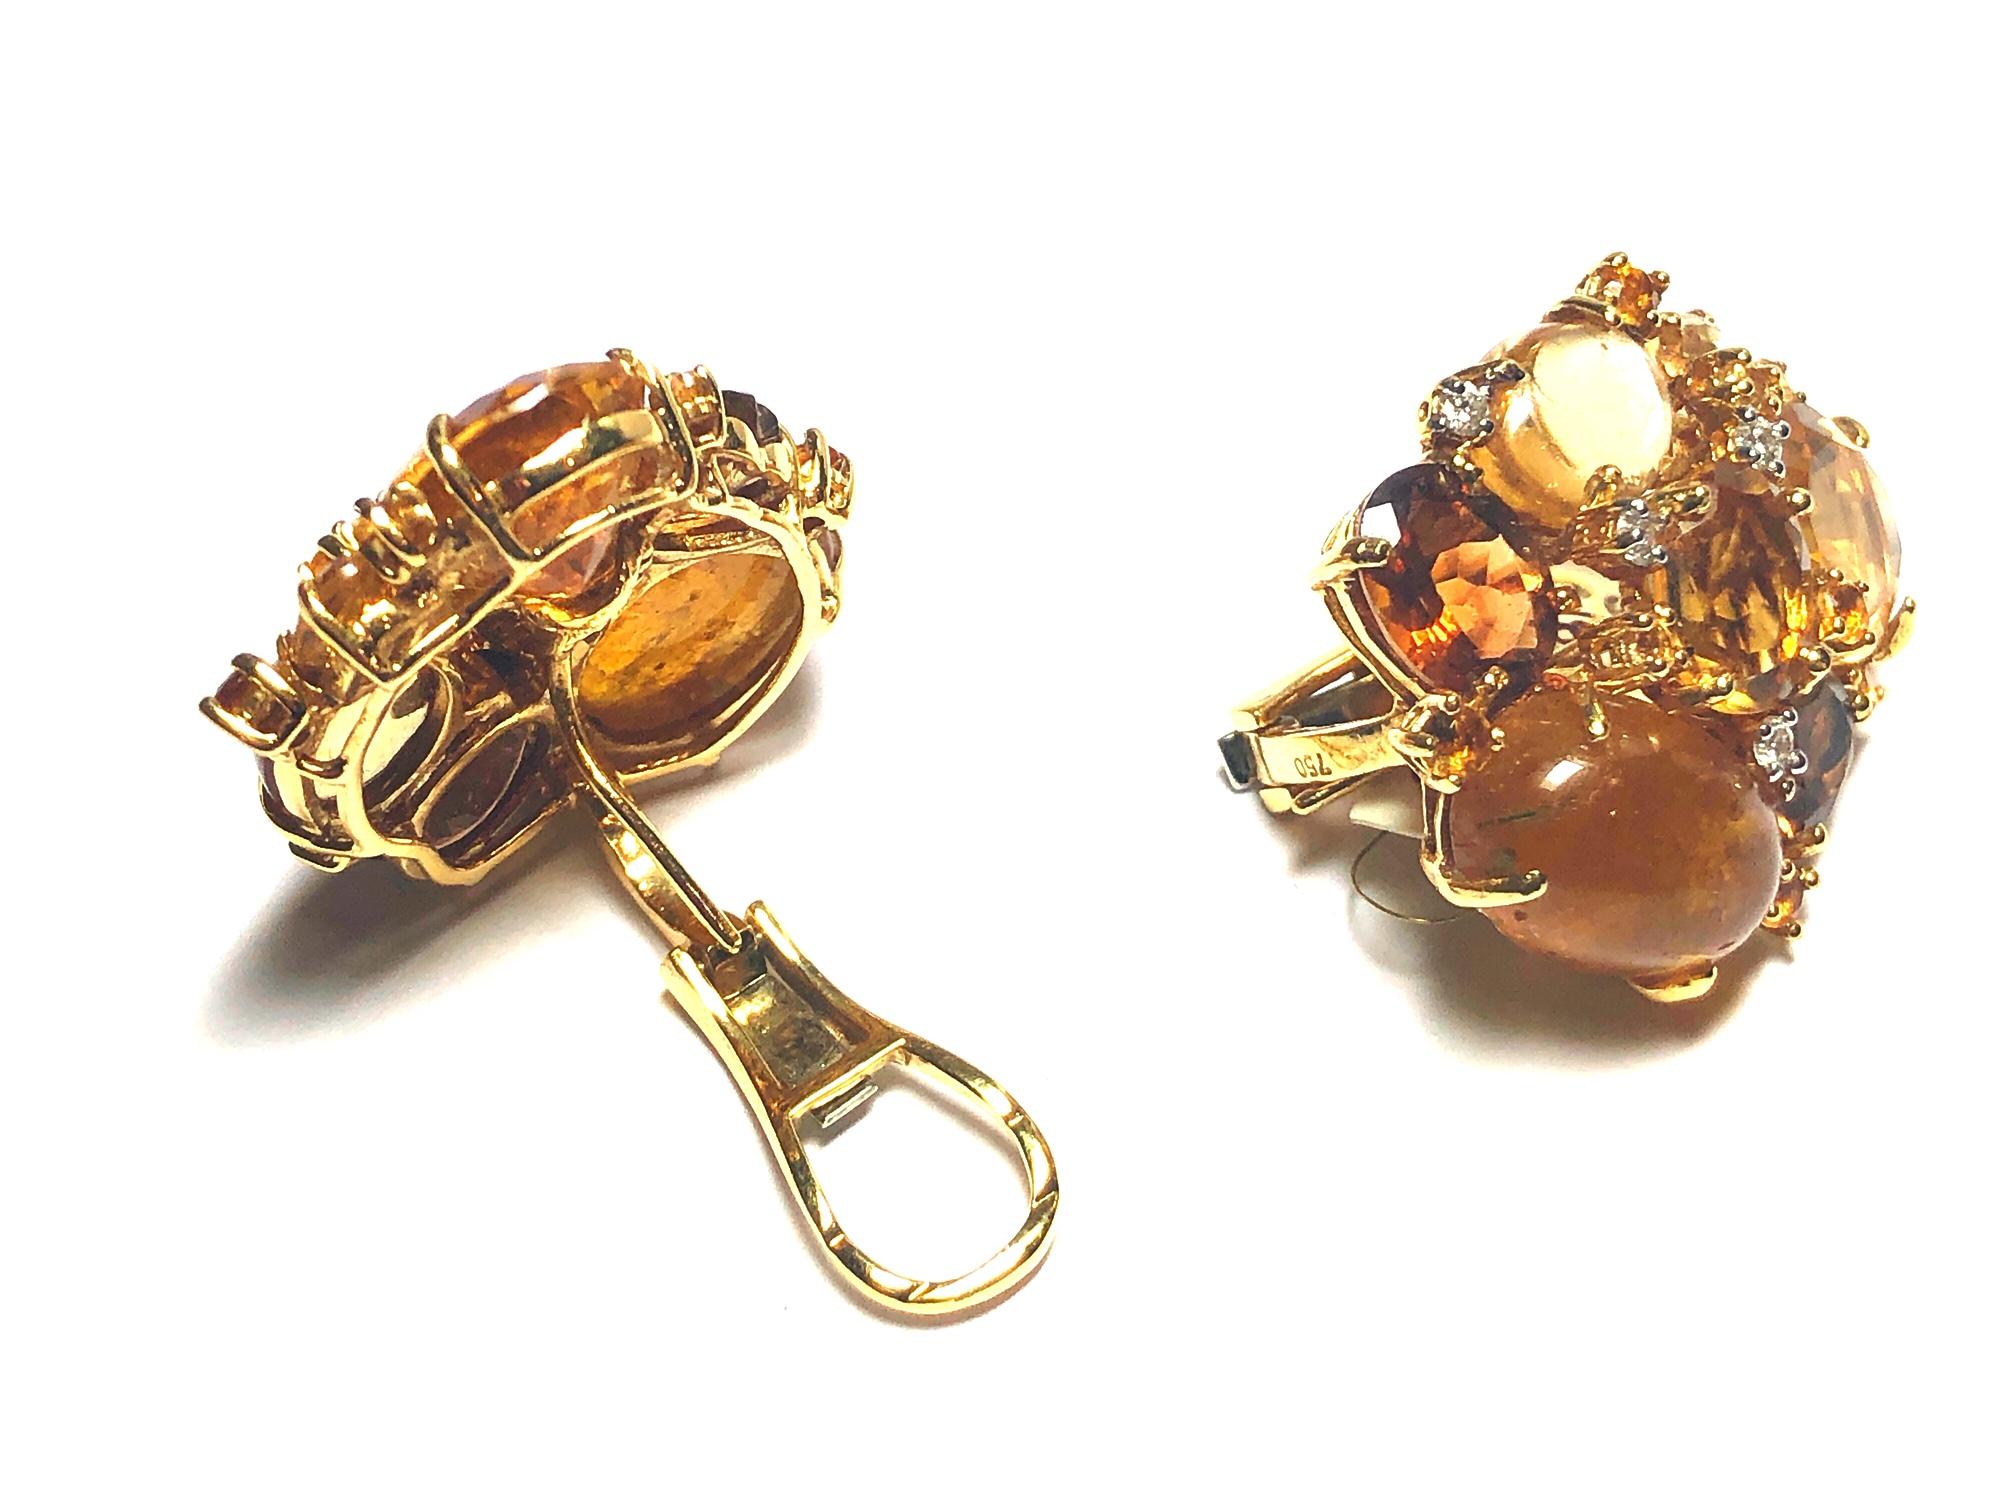 A pair of citrine and tourmaline cluster earrings, mounted in gold, set with mixed-cuts of citrine, yellow tourmaline and with round brilliant-cut diamonds.